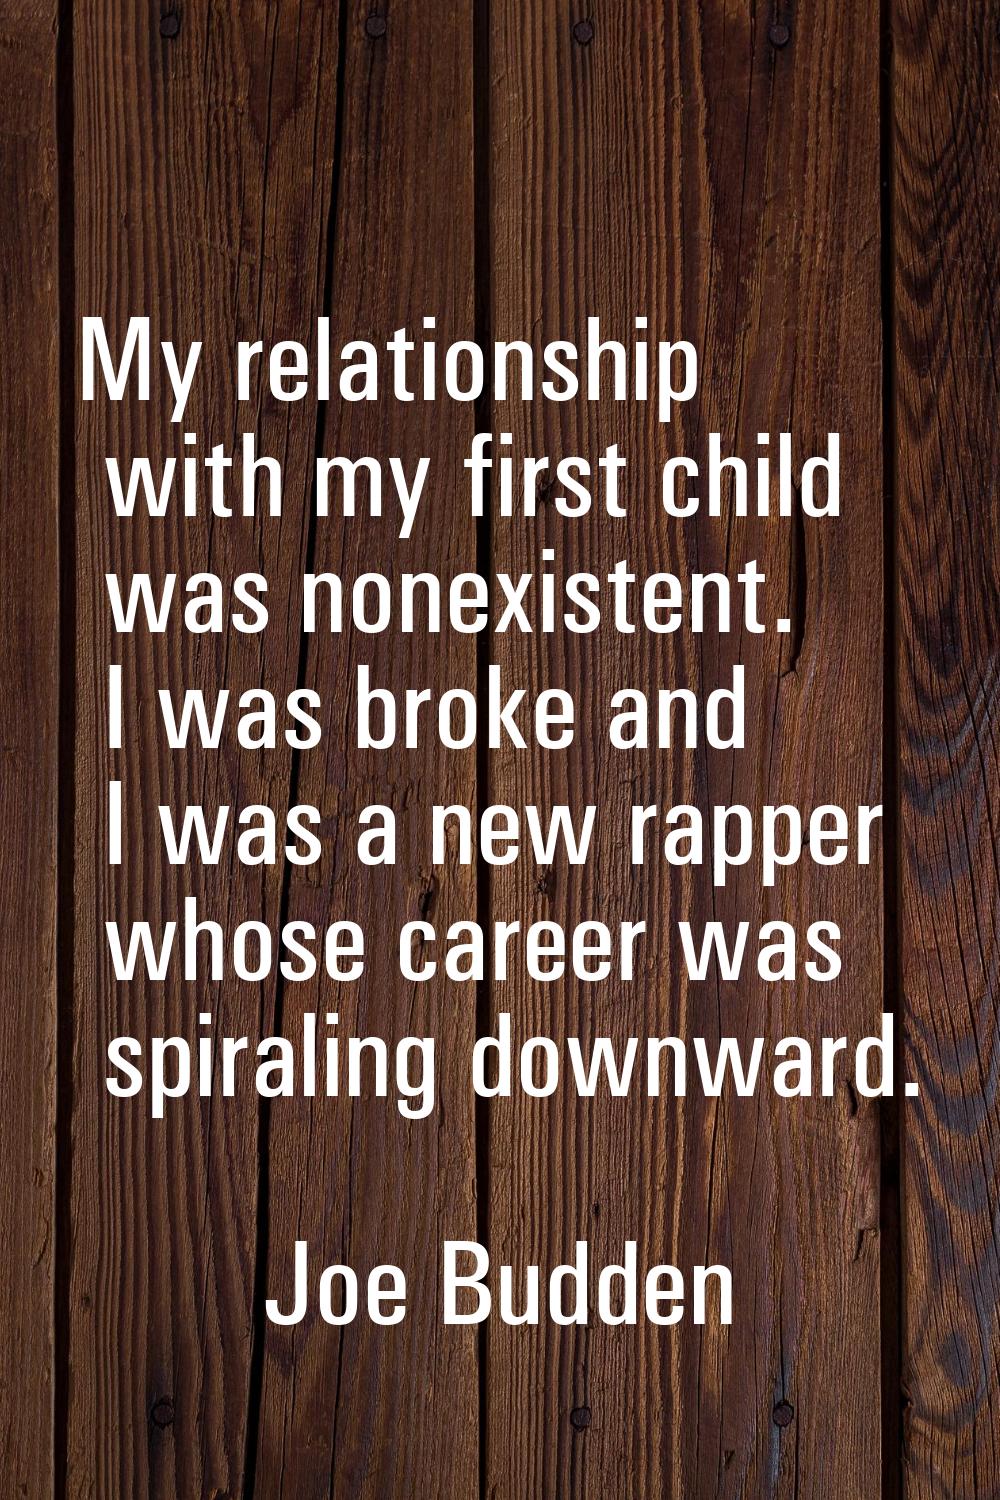 My relationship with my first child was nonexistent. I was broke and I was a new rapper whose caree